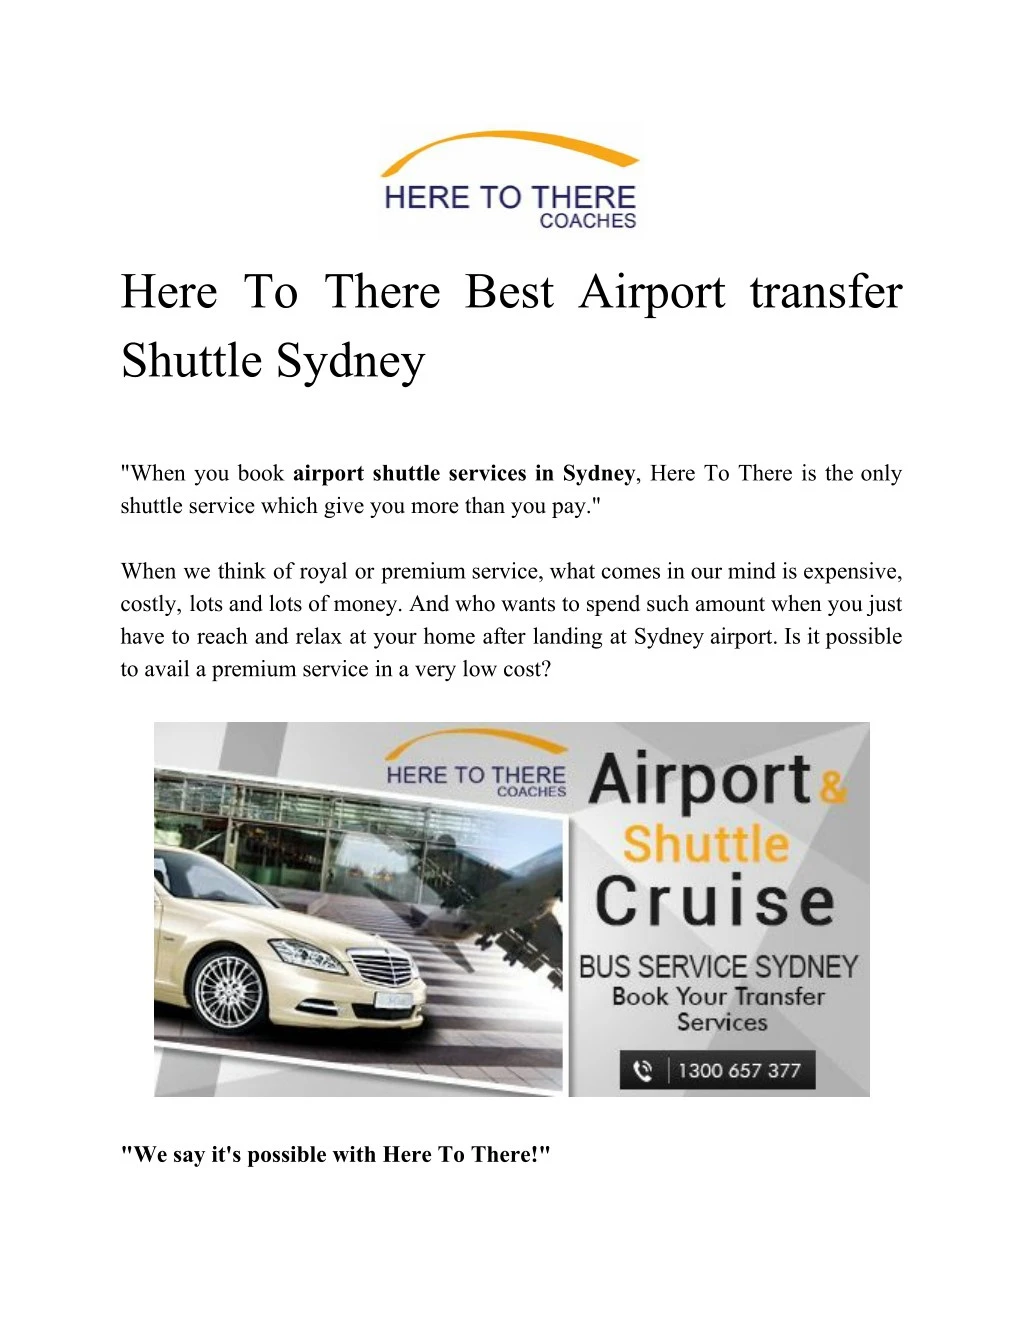 here to there best airport transfer shuttle